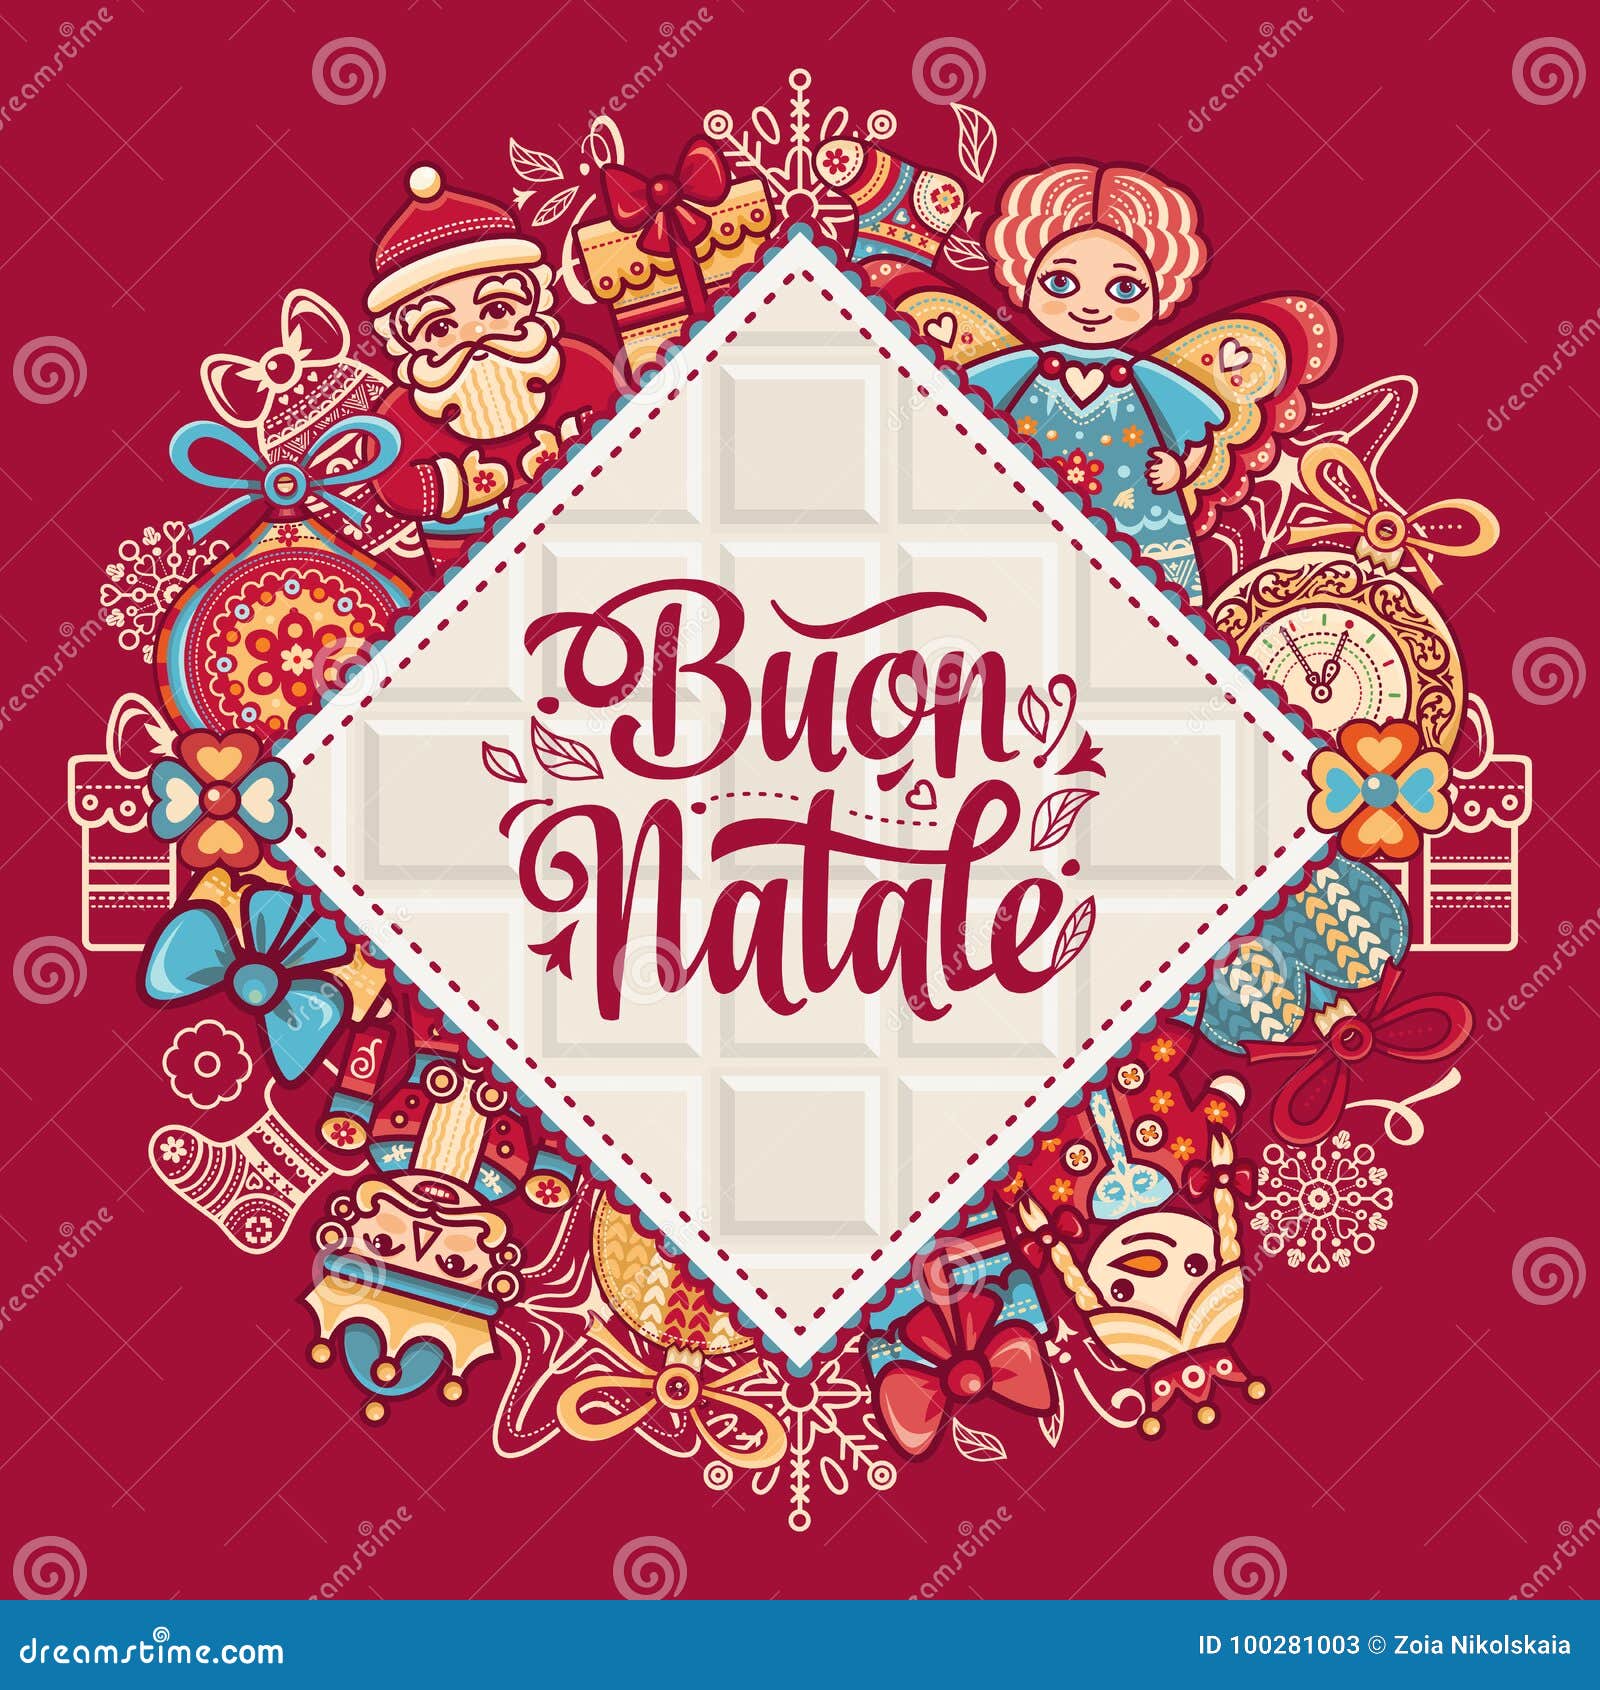 Buon Natale Card.Buon Natale Christmas Template Greeting Card Winter Holiday In Italy Congratulation On Italian Vintage Style Stock Illustration Illustration Of Buon Italian 100281003